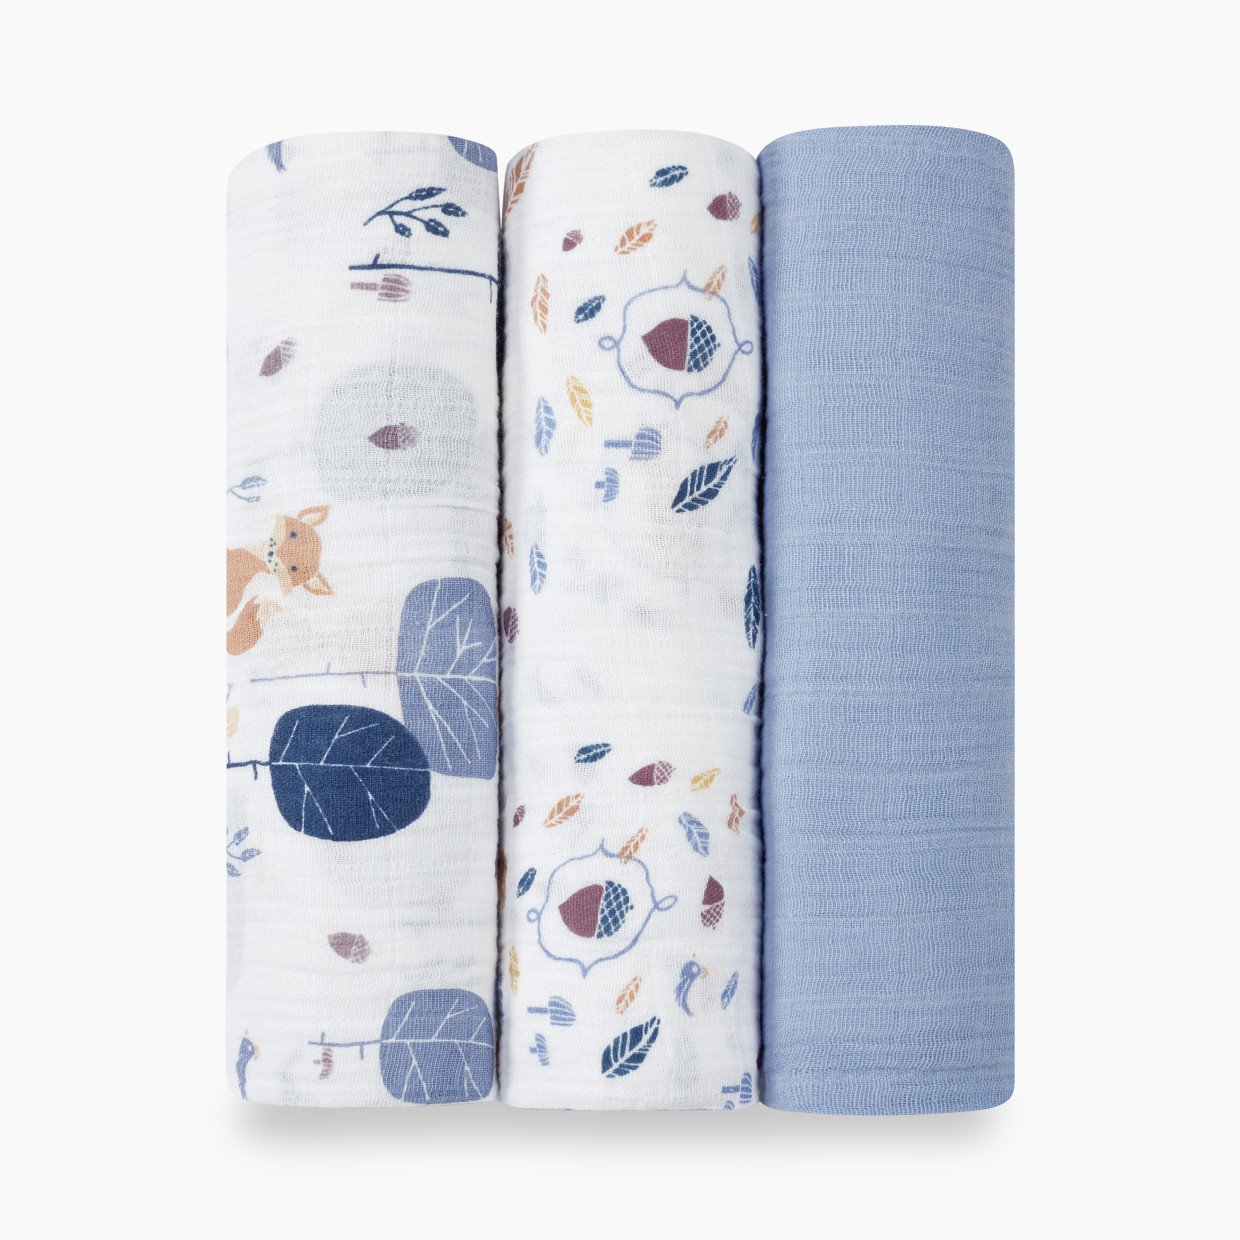 Aden + Anais Organic Muslin Swaddles (3 Pack) - Into the Woods.